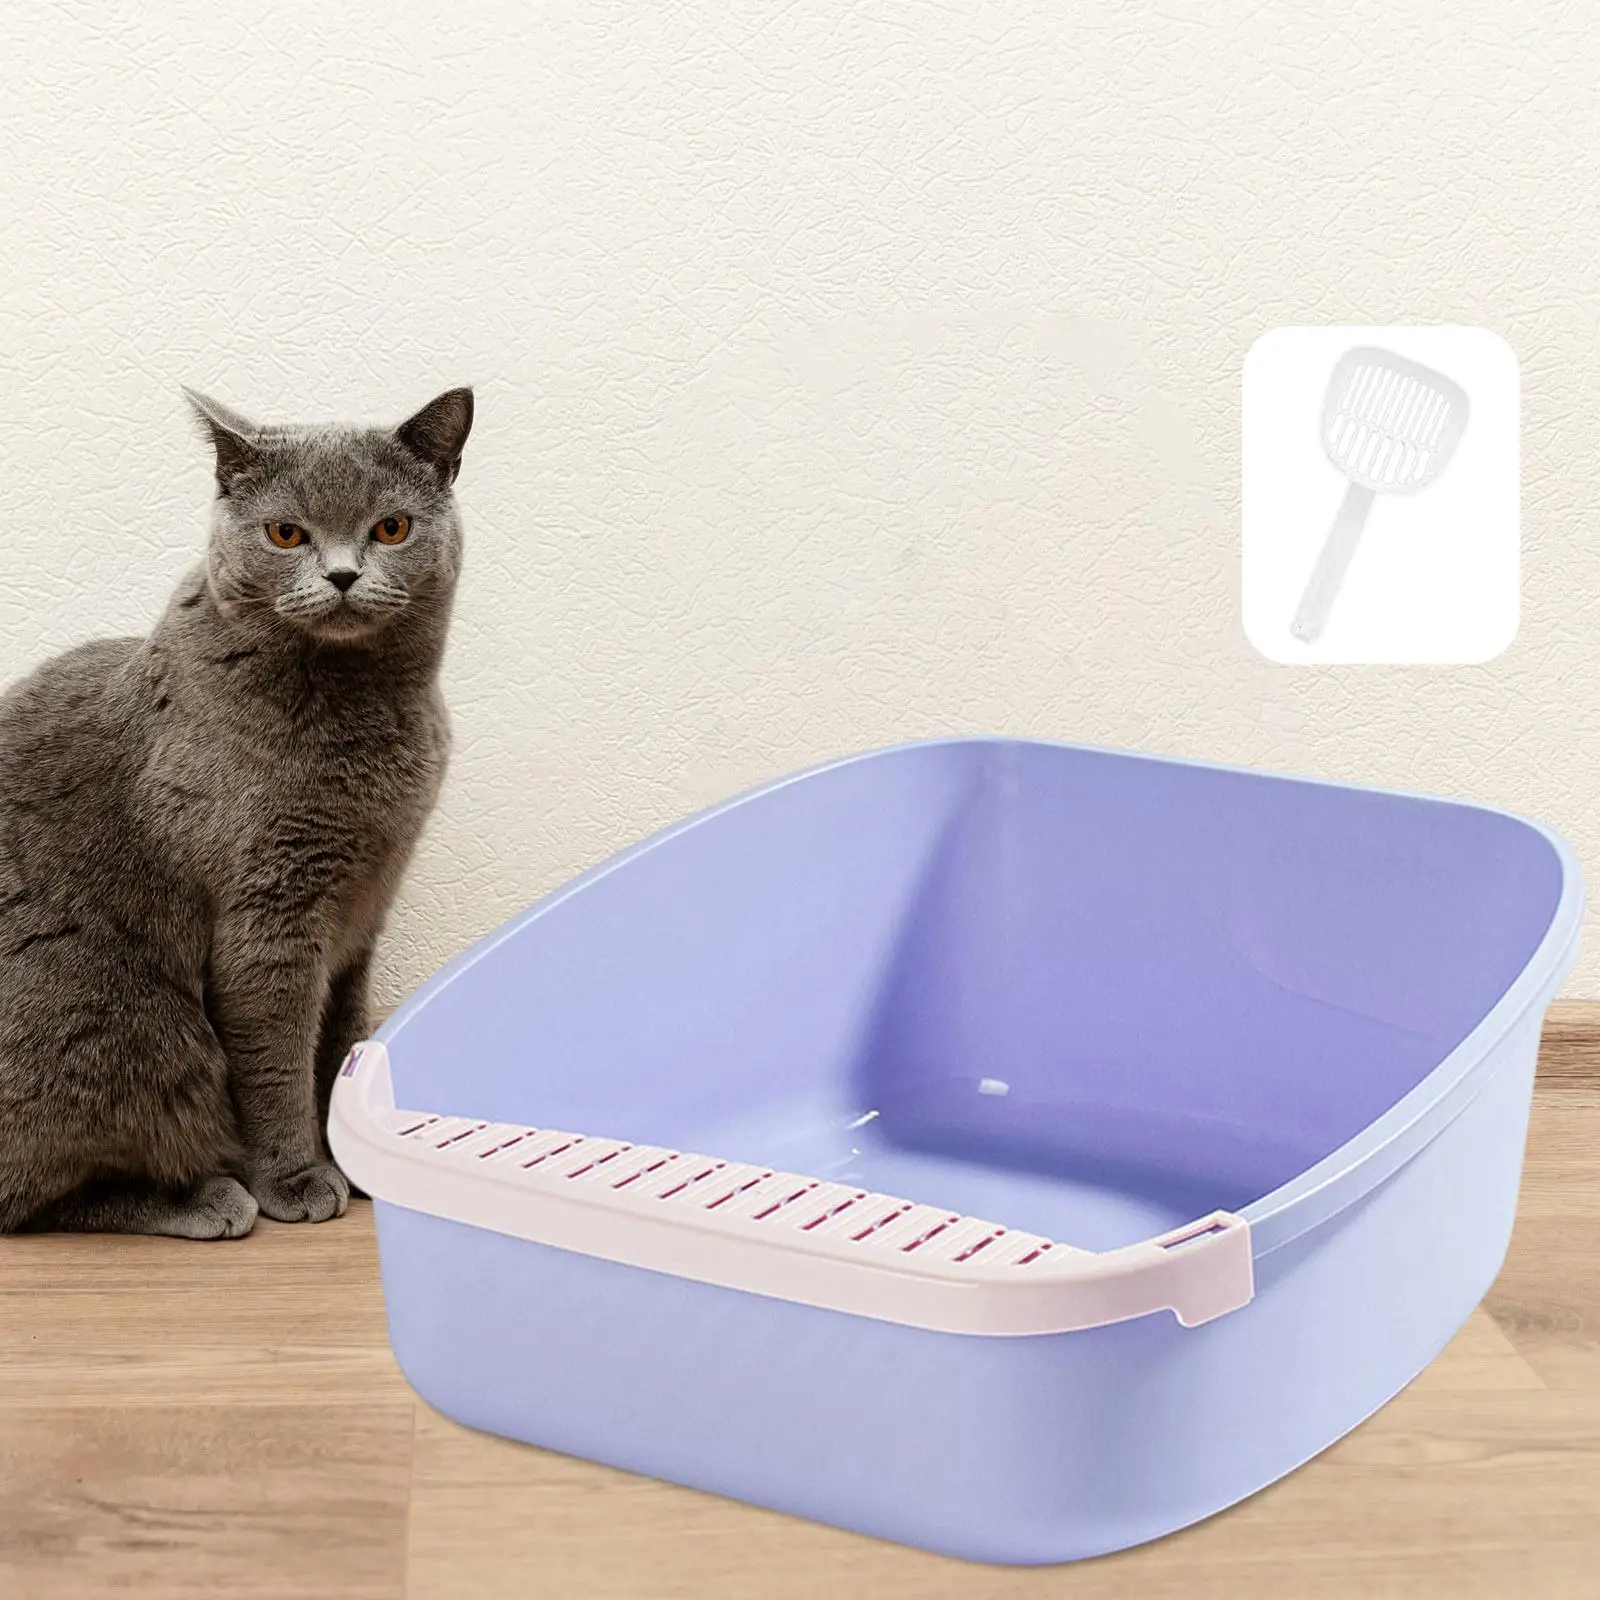 Cat Litter Boxes Indoor Cats Cat Potty Toilet for Bunny Small Animals Travel